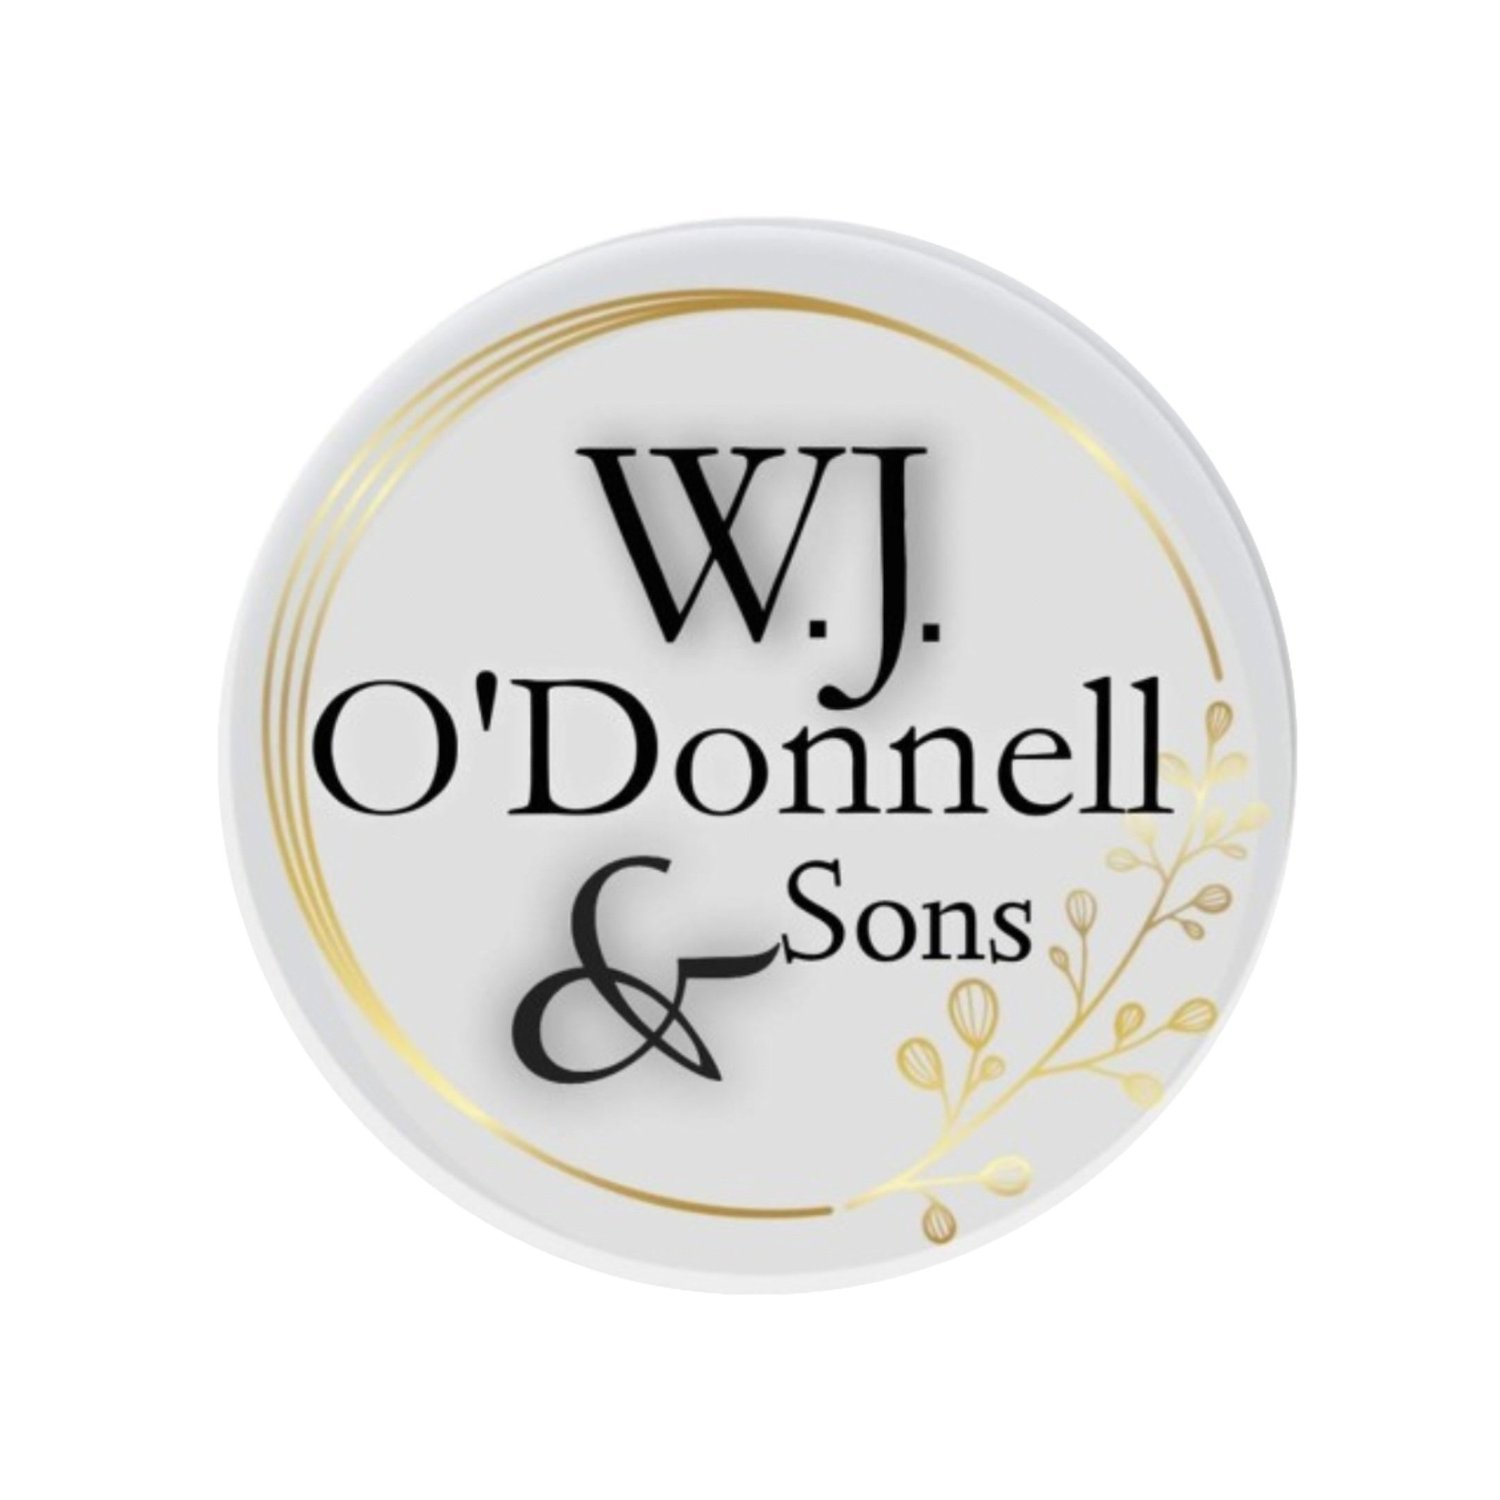 WJ O'Donnell & Sons Funeral Directors